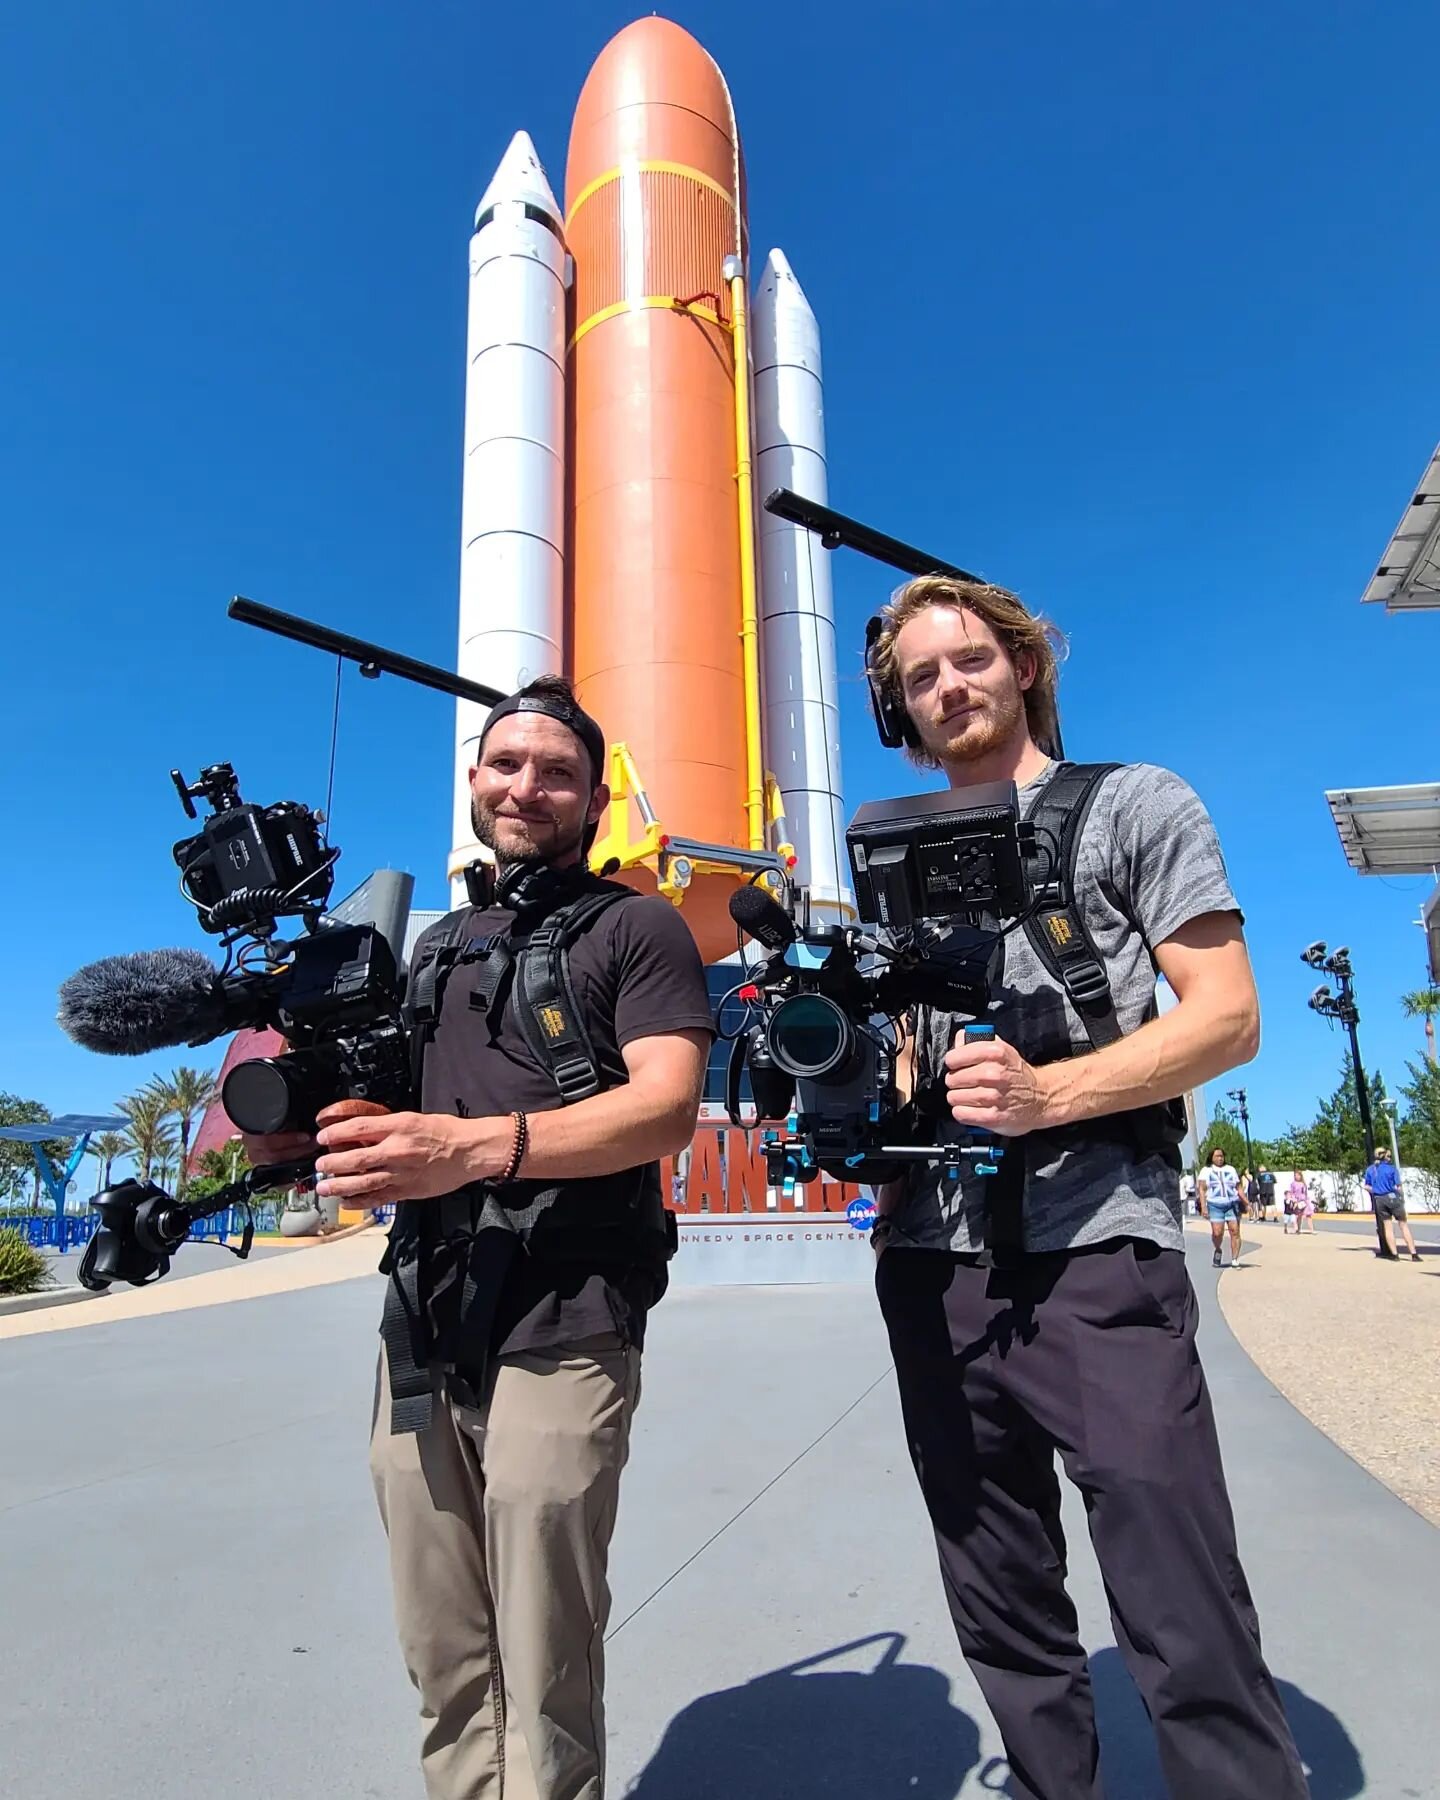 Day 2 was a BLAST! Looking forward to the LAUNCH of this show on Amazon Prime. 🚀 👨&zwj;🚀 
.
.
I'd like to thank all my sponsors and friends at: @hollylandtech @deitymicrophones @rodemic @sonyprofilmmaking @easyrig @feelworld_monitor @vaxis_global 